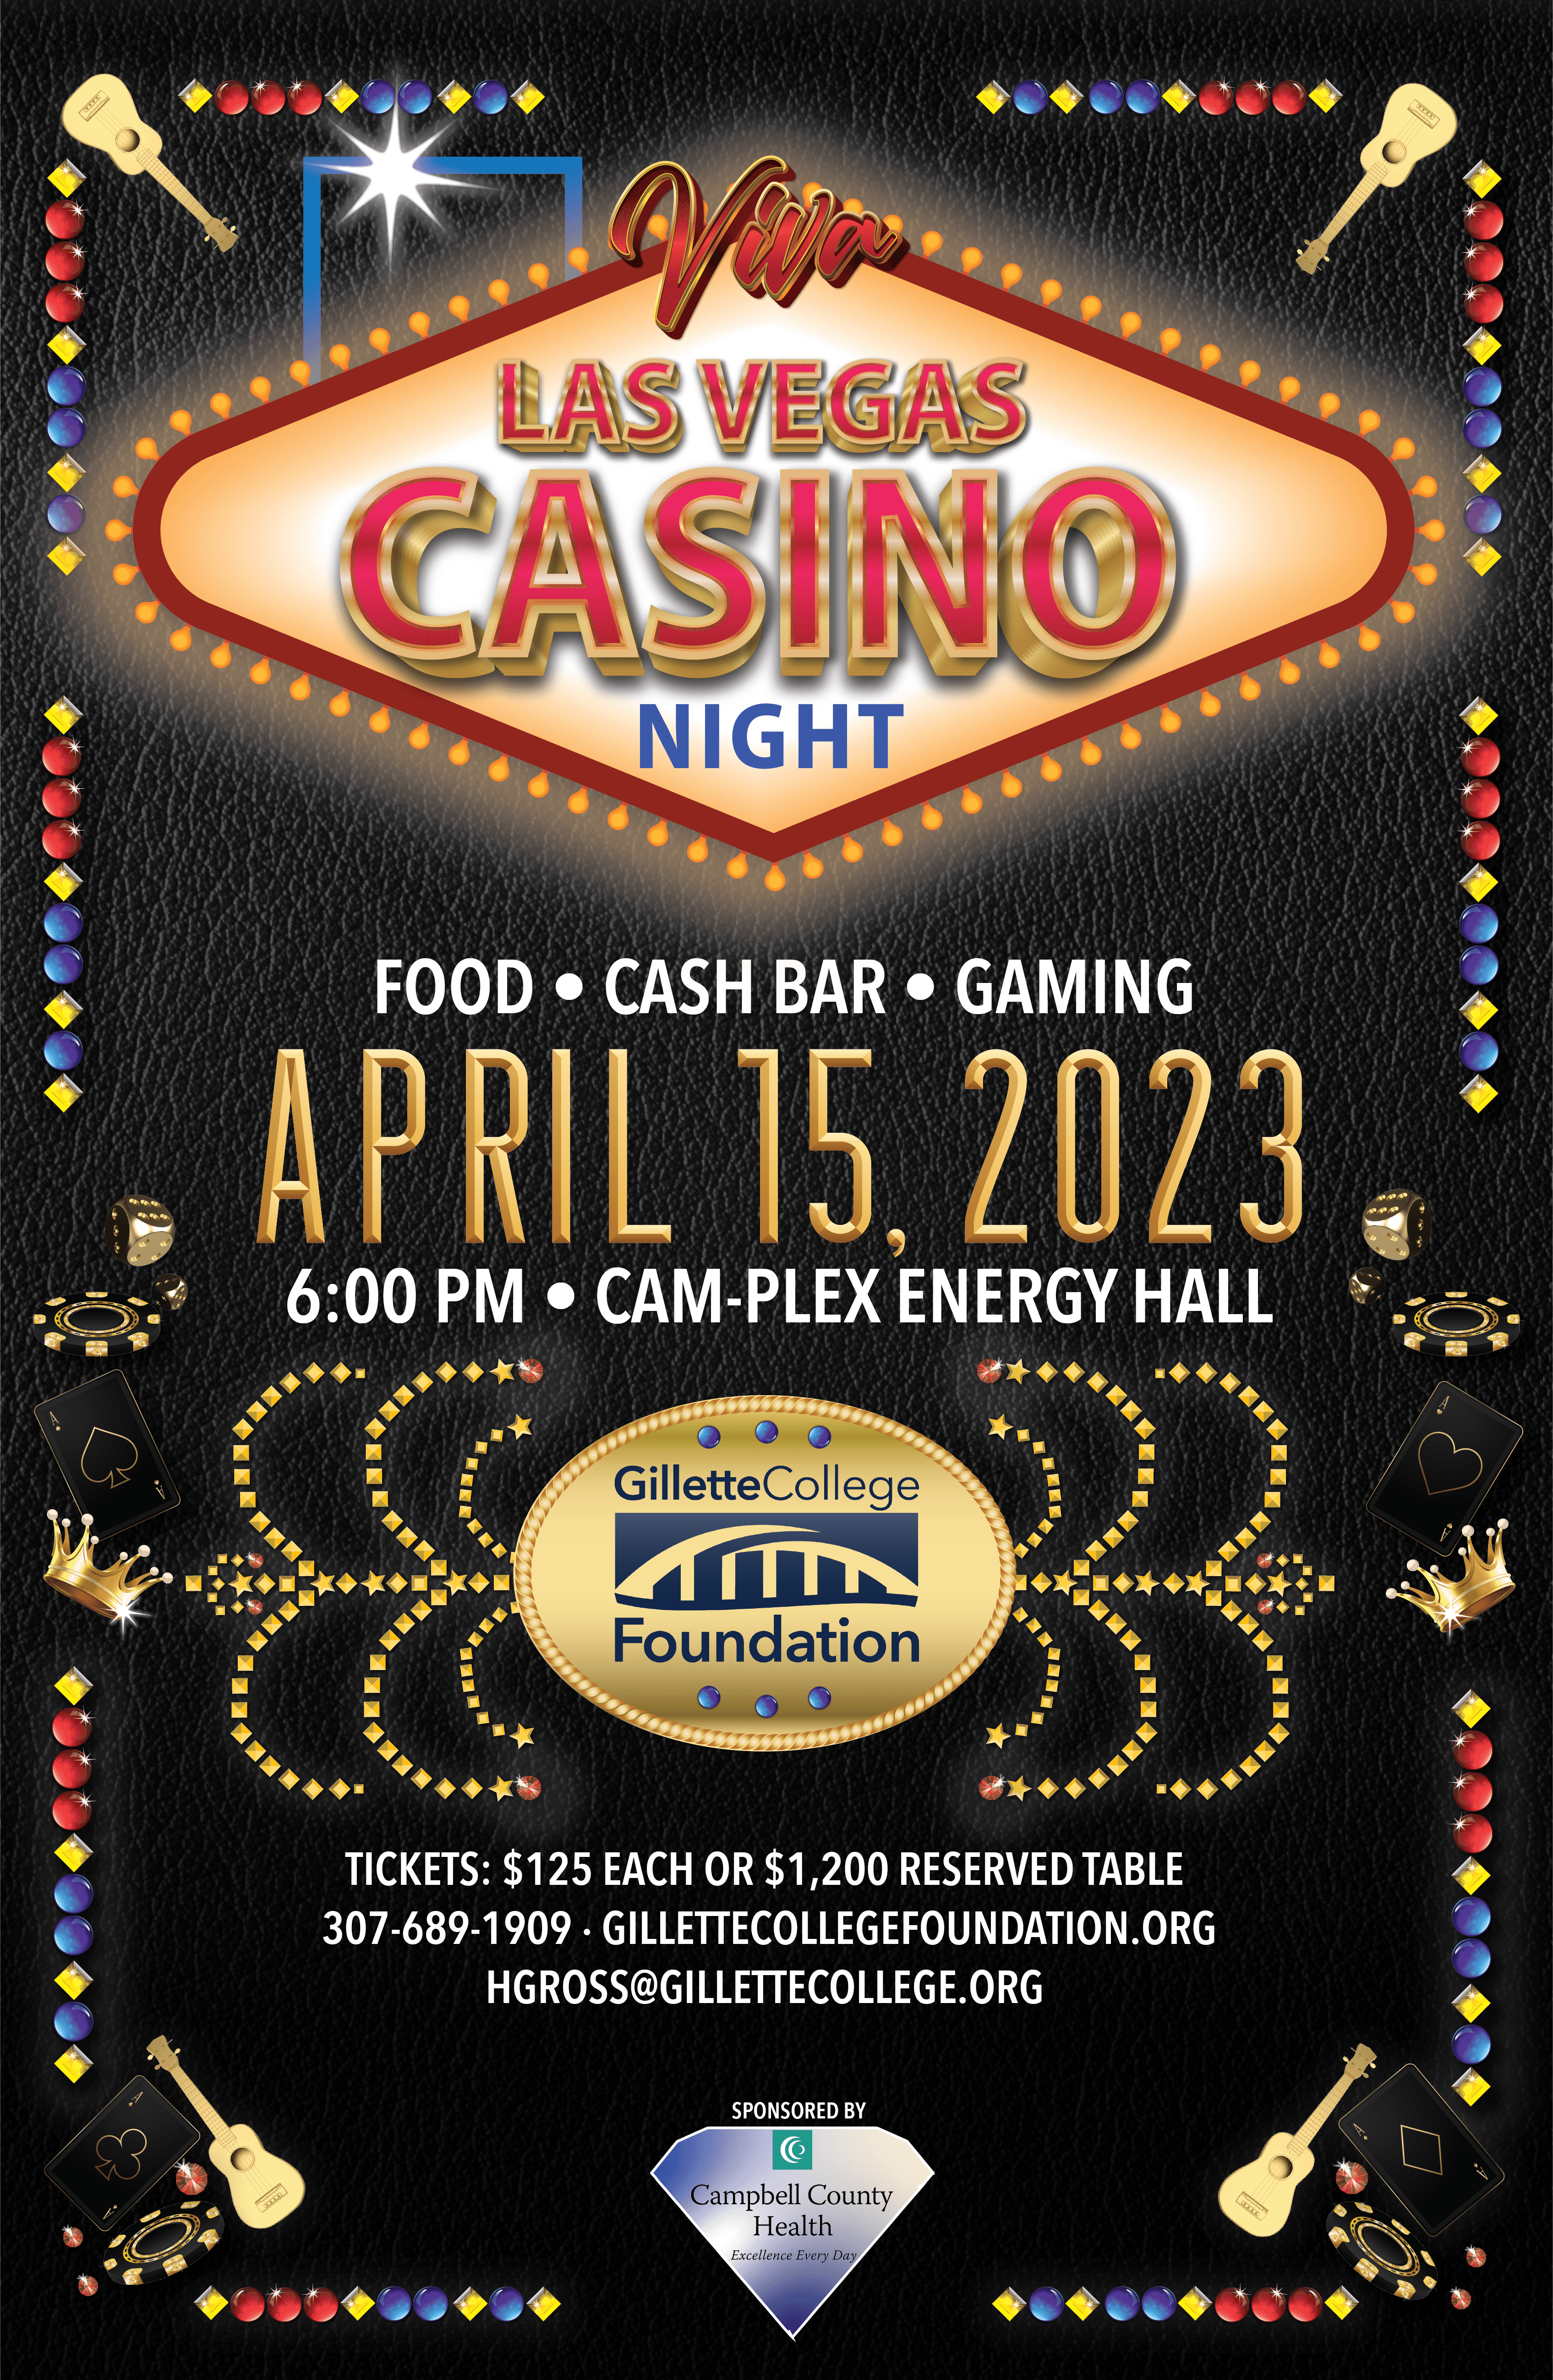 Join us for an evening of fun and gaming!